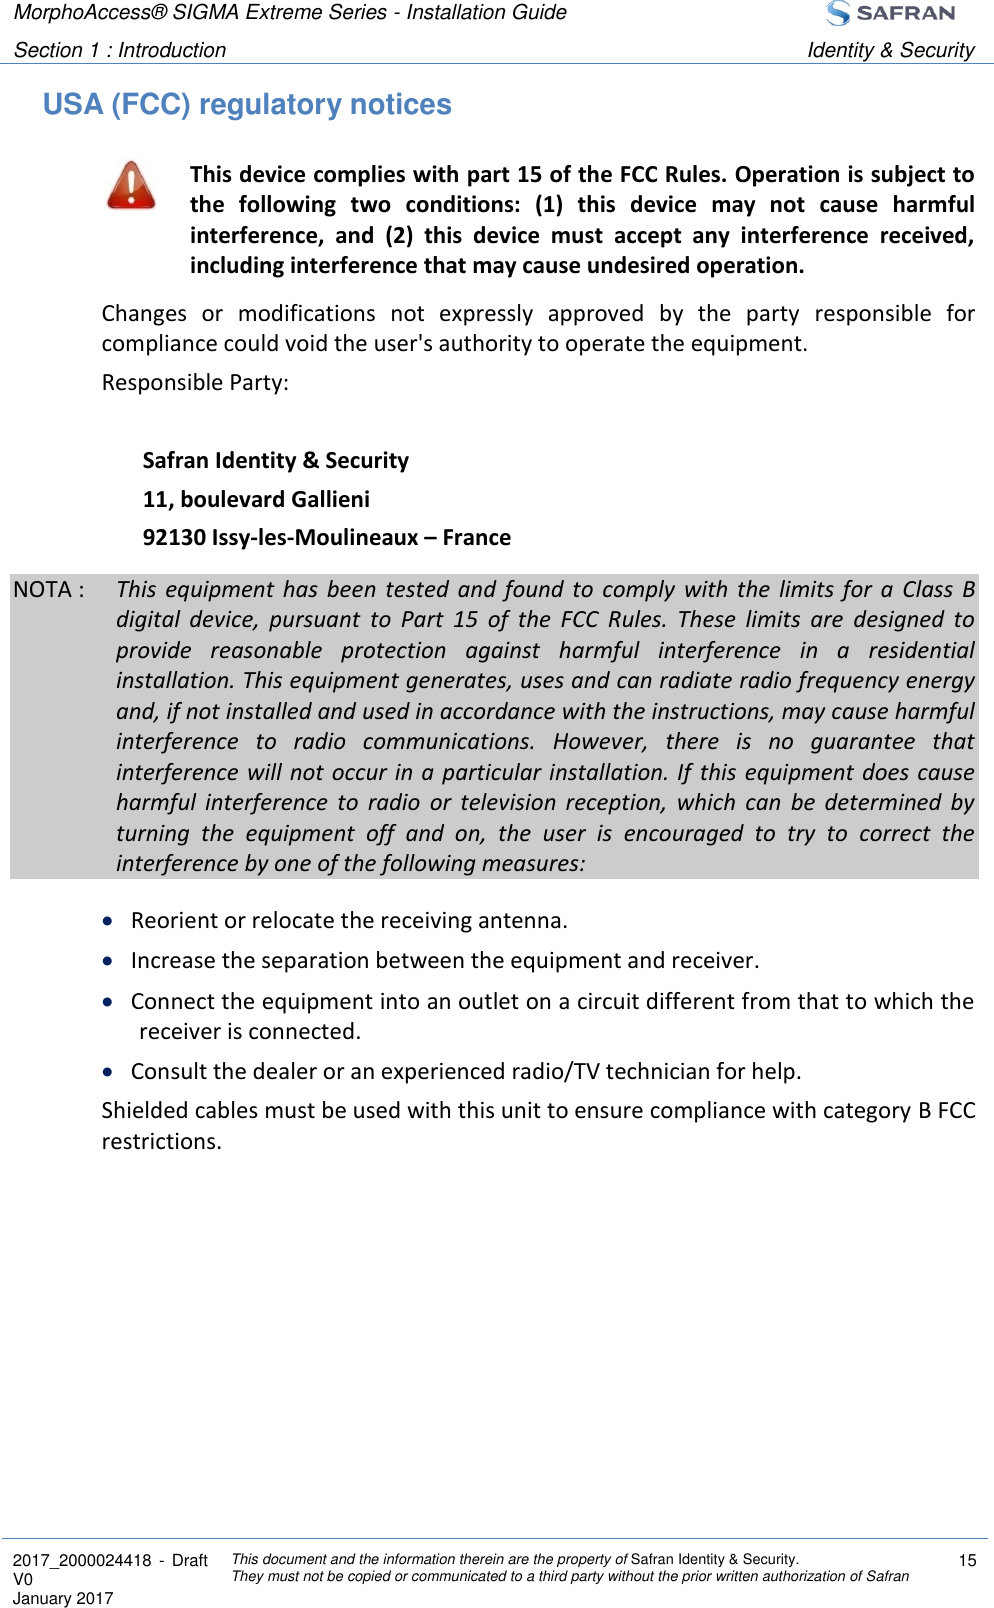 MorphoAccess® SIGMA Extreme Series - Installation Guide  Section 1 : Introduction Identity &amp; Security  2017_2000024418  - Draft V0 January 2017 This document and the information therein are the property of Safran Identity &amp; Security. They must not be copied or communicated to a third party without the prior written authorization of Safran 15  USA (FCC) regulatory notices  This device complies with part 15 of the FCC Rules. Operation is subject to the  following  two  conditions:  (1)  this  device  may  not  cause  harmful interference,  and  (2)  this  device  must  accept  any  interference  received, including interference that may cause undesired operation. Changes  or  modifications  not  expressly  approved  by  the  party  responsible  for compliance could void the user&apos;s authority to operate the equipment. Responsible Party:  Safran Identity &amp; Security 11, boulevard Gallieni 92130 Issy-les-Moulineaux – France NOTA :  This  equipment  has  been  tested  and  found to  comply  with  the  limits  for  a  Class  B digital  device,  pursuant  to  Part  15  of  the  FCC  Rules.  These  limits  are  designed  to provide  reasonable  protection  against  harmful  interference  in  a  residential installation. This equipment generates, uses and can radiate radio frequency energy and, if not installed and used in accordance with the instructions, may cause harmful interference  to  radio  communications.  However,  there  is  no  guarantee  that interference will not occur in a particular installation. If  this equipment does cause harmful  interference  to  radio  or  television  reception,  which  can  be  determined  by turning  the  equipment  off  and  on,  the  user  is  encouraged  to  try  to  correct  the interference by one of the following measures:  Reorient or relocate the receiving antenna.  Increase the separation between the equipment and receiver.  Connect the equipment into an outlet on a circuit different from that to which the receiver is connected.  Consult the dealer or an experienced radio/TV technician for help. Shielded cables must be used with this unit to ensure compliance with category B FCC restrictions.   